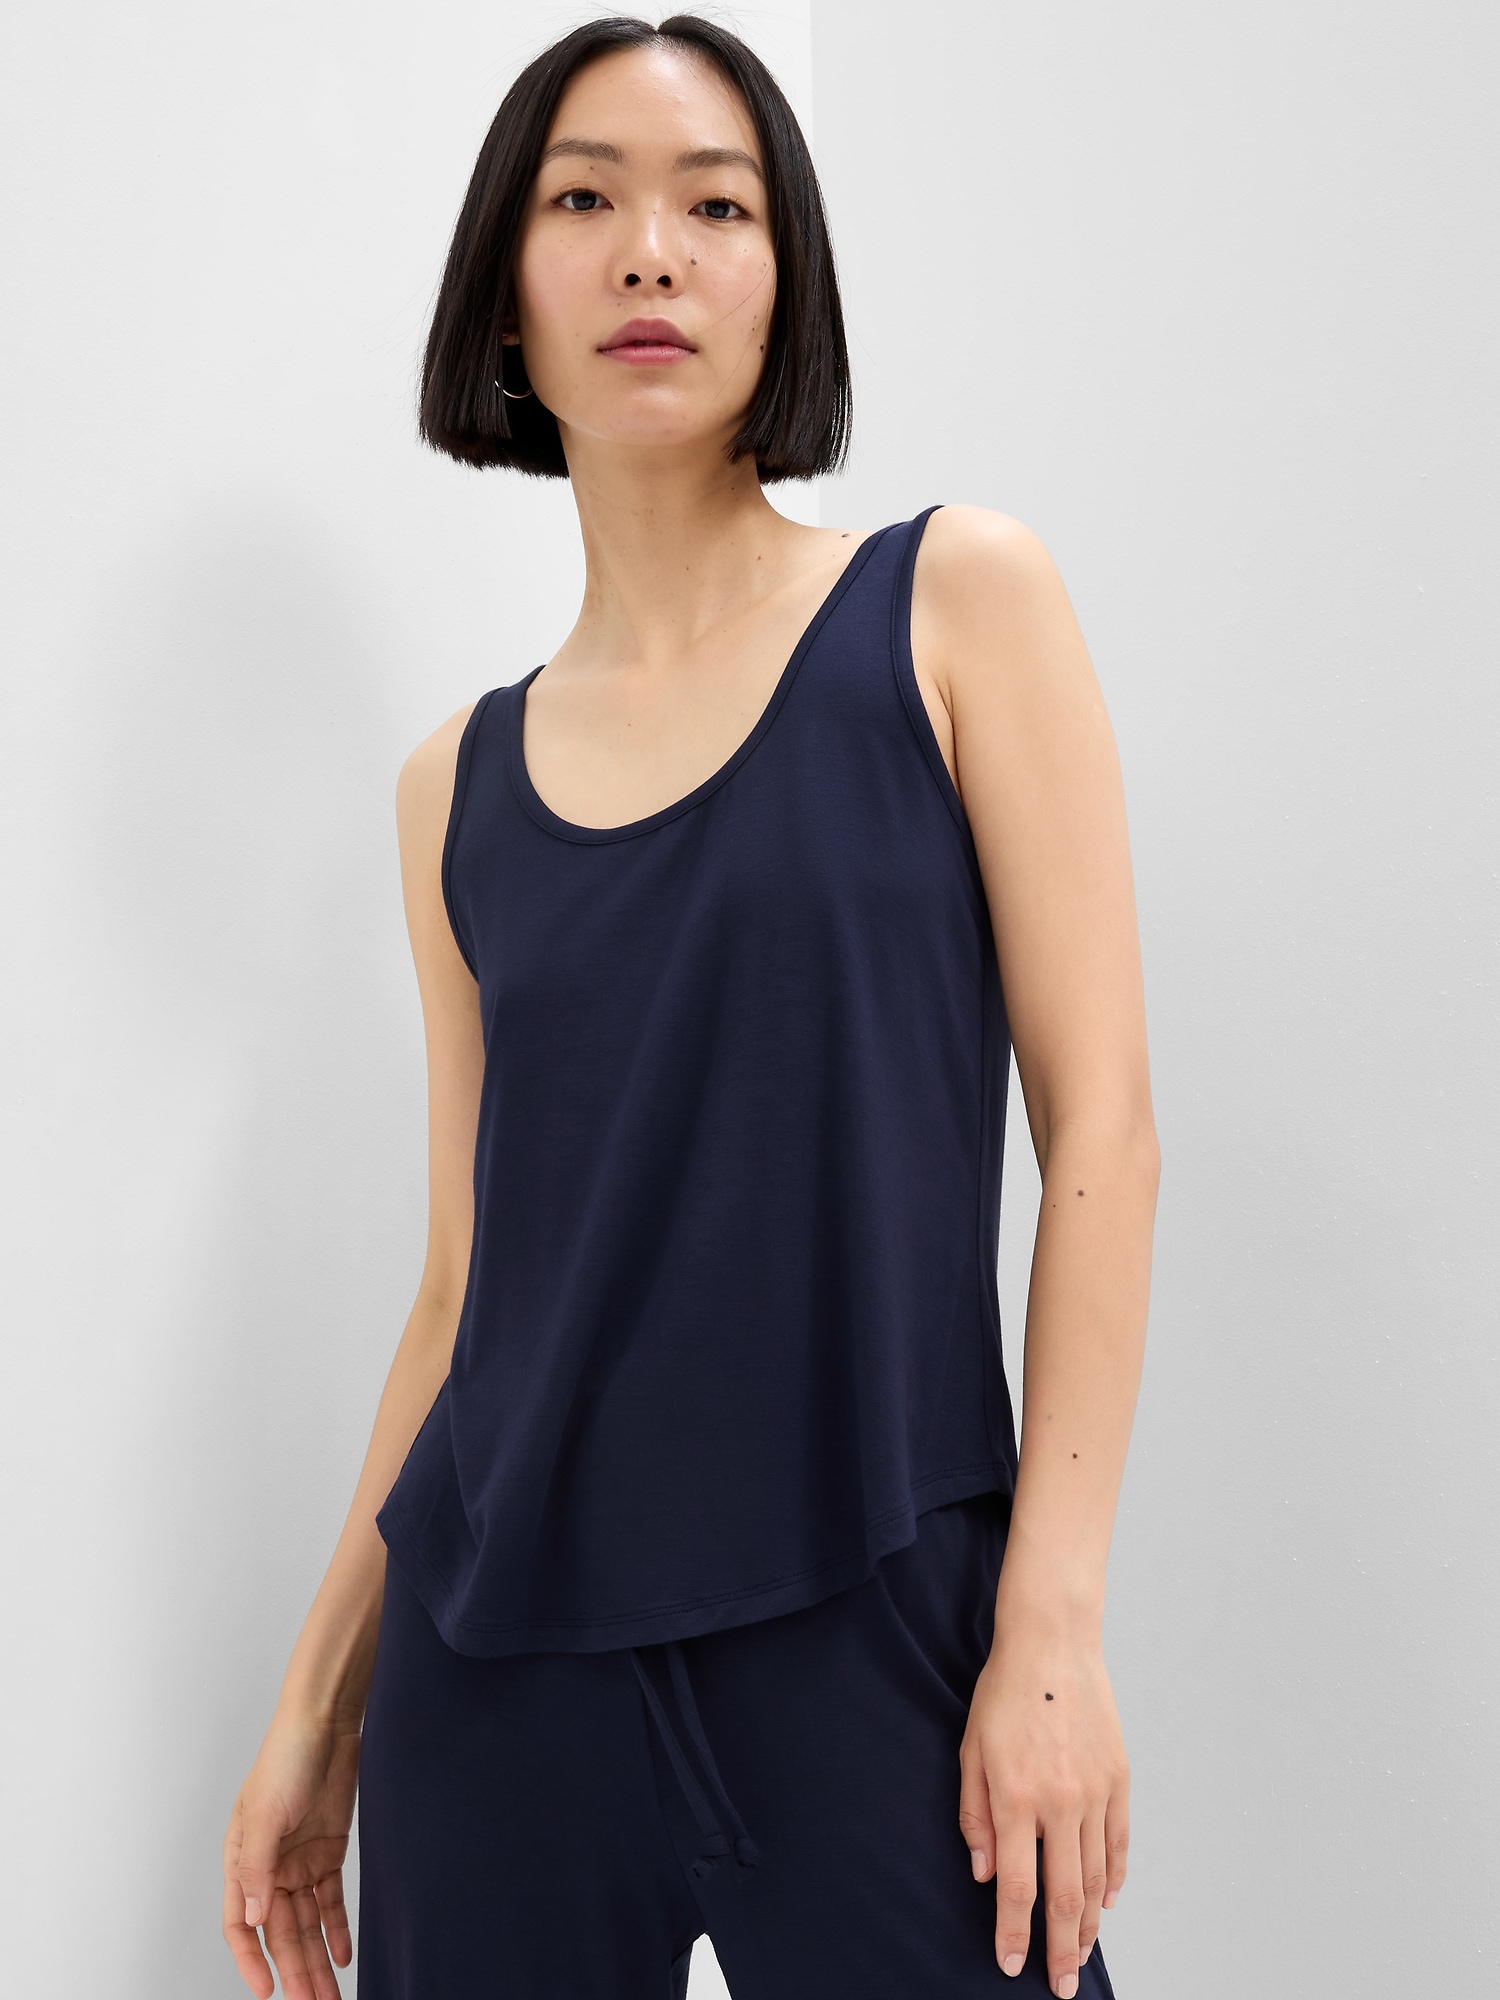 Relaxed Pure Body PJ Tank Top